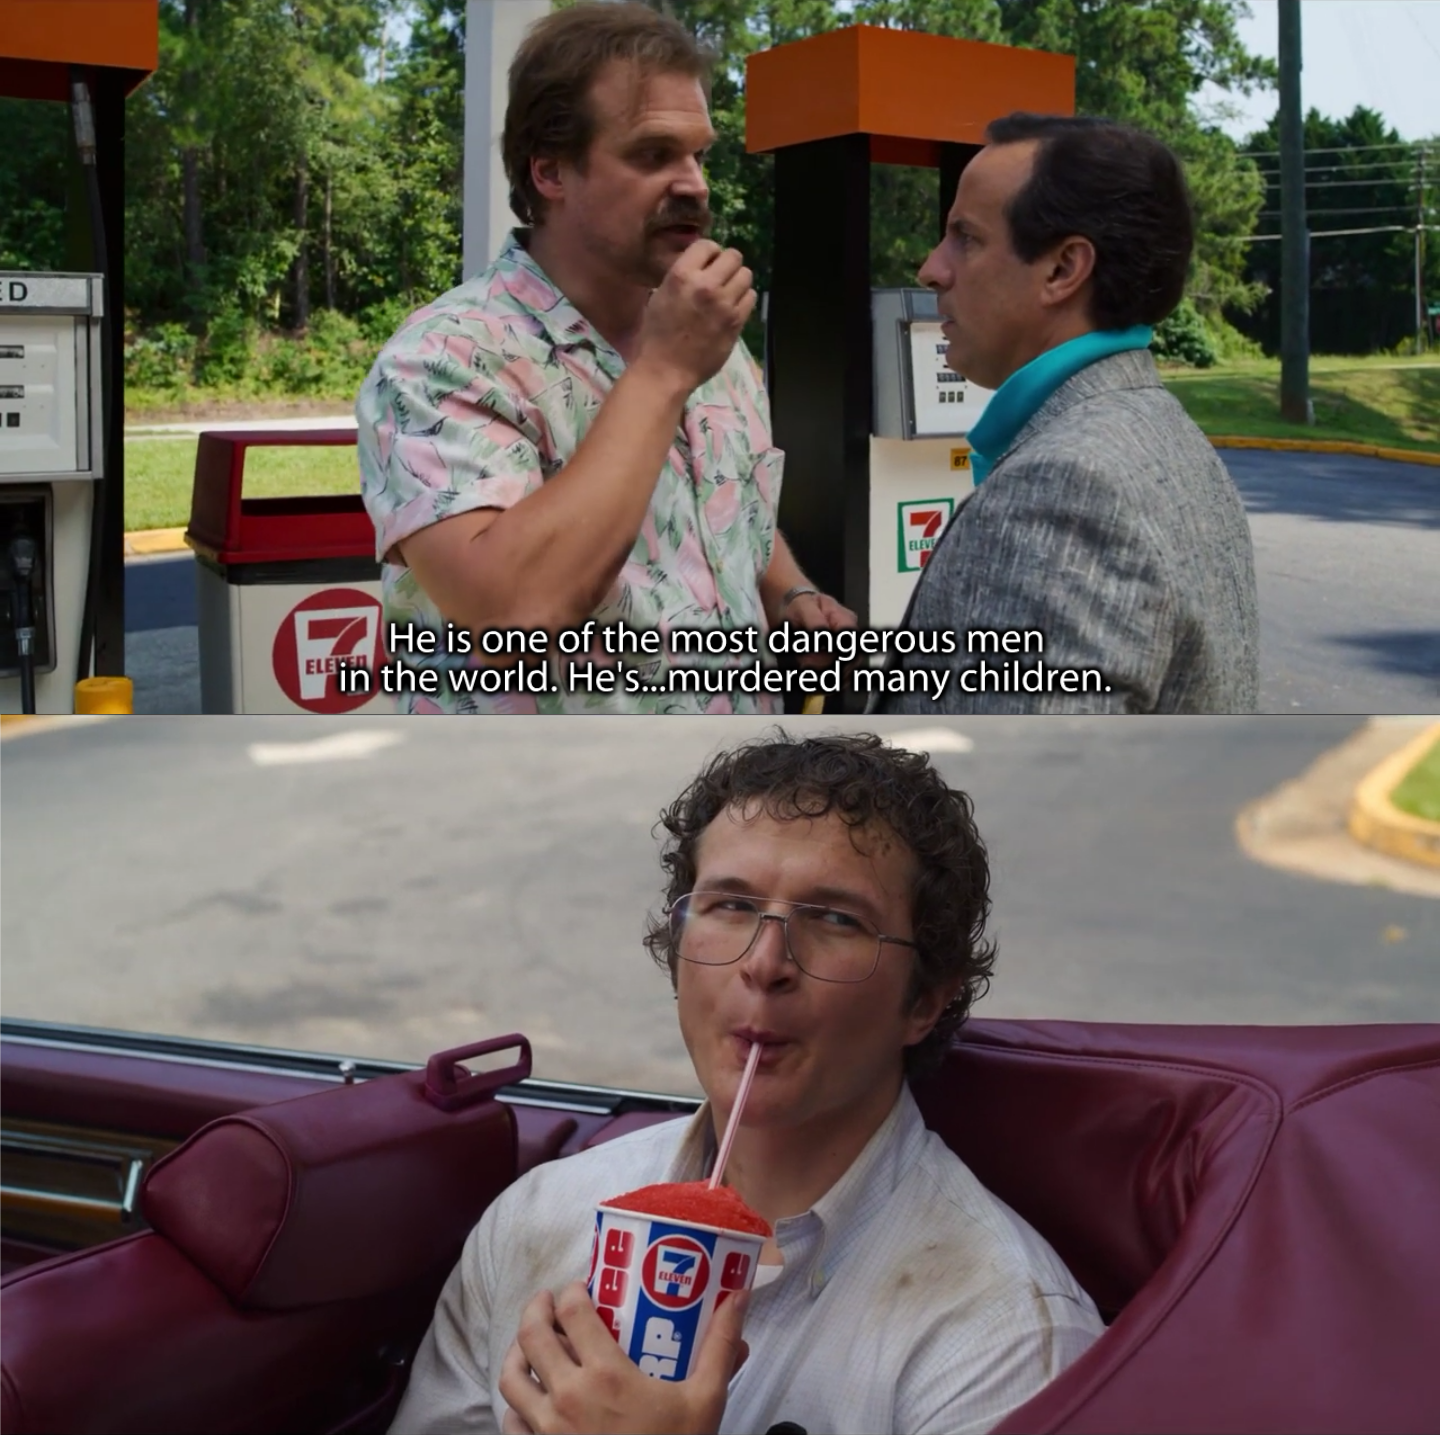 alexei stranger things slurpee - . He is one of the most dangerous men me in the world. He's...murdered many children. Nd